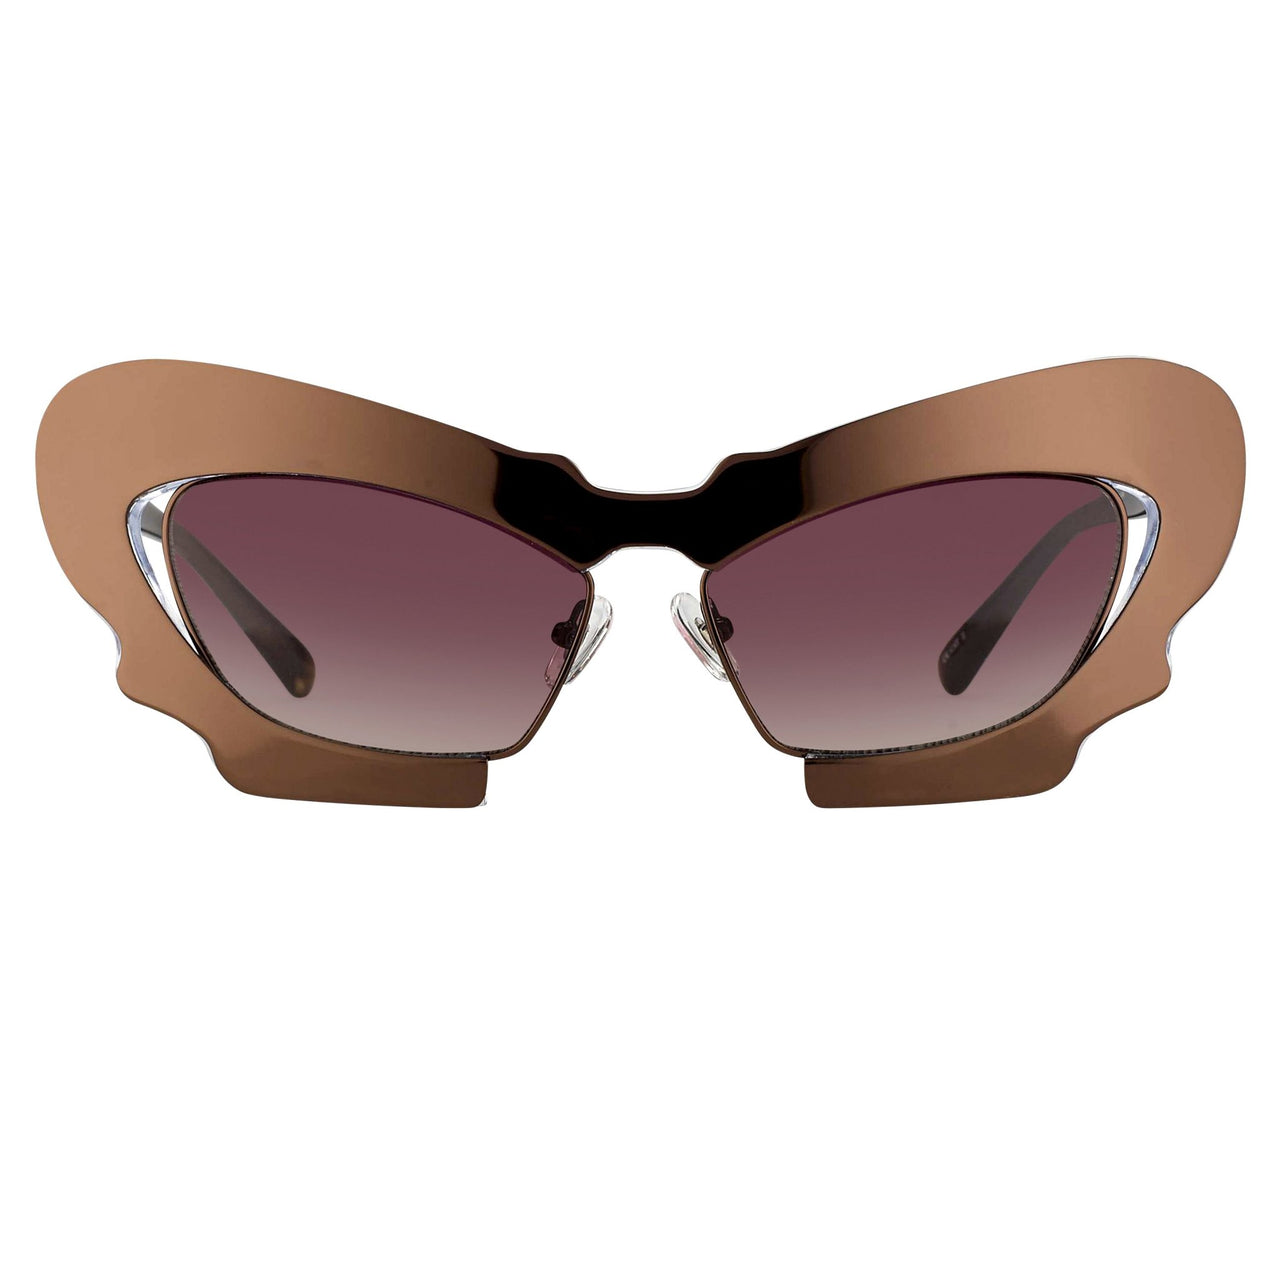 Prabal Gurung Sunglasses Female Cat Eye Chocolate Bronze Category 2 Red Gradient Lenses PG1C12SUN - Watches & Crystals